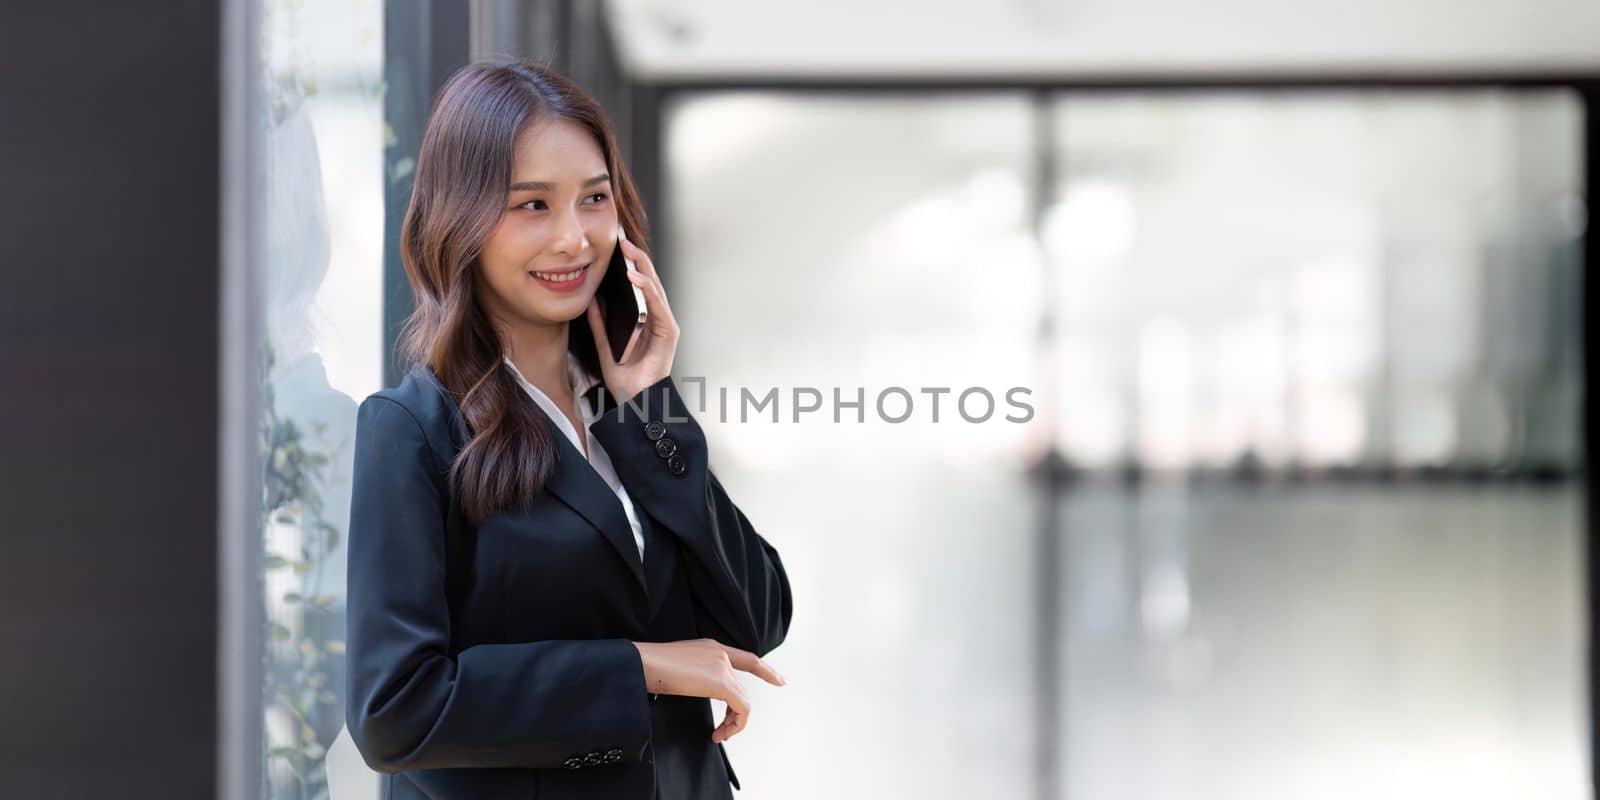 Happy young asian business woman wearing suit holding mobile phone standing in her workstation office.